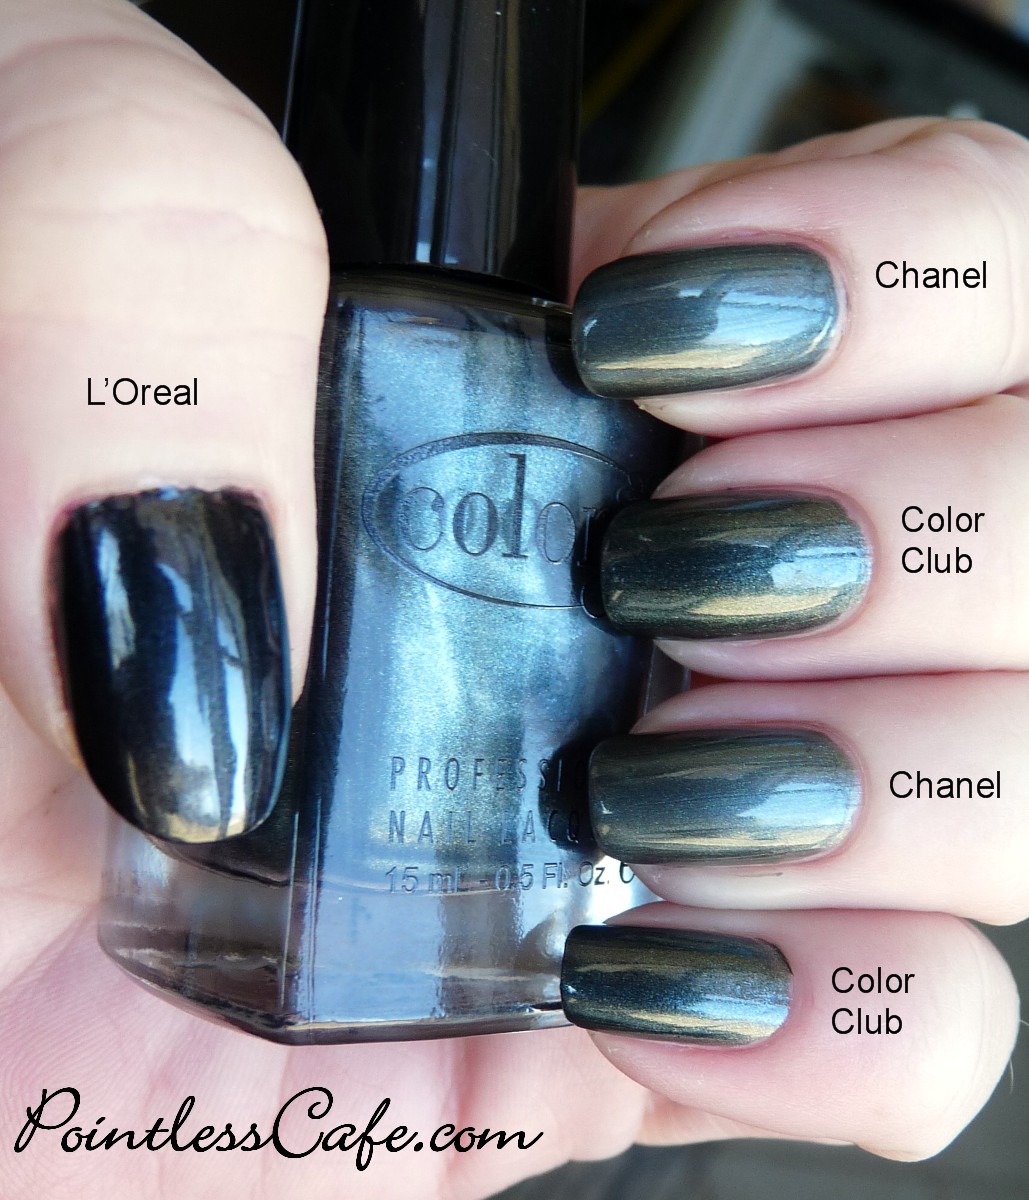 Pointless Cafe: Chanel Black Pearl vs Color Club Voodoo You Do - Pic Heavy